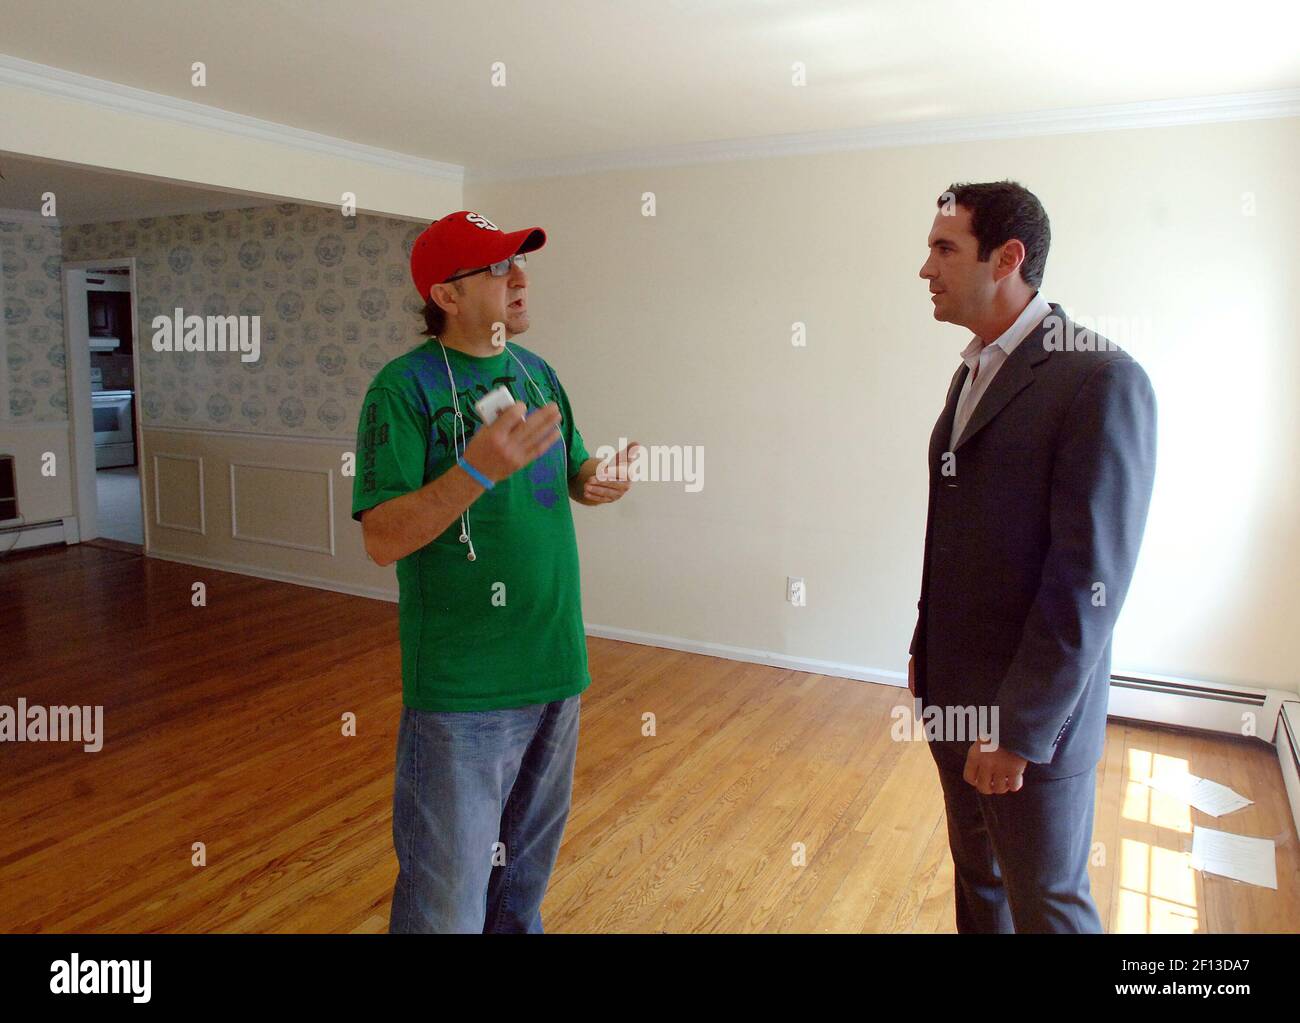 Nino DiBenedetto, left, a potential homebuyer, with Wayne M. Frankel, owner/broker of Exit Realty Premier, discuss a house that is for sale in Massapequa, New York, July 30, 2008. (Photo by Karen Wiles Stab/Newsday/MCT/Sipa USA) Stock Photo